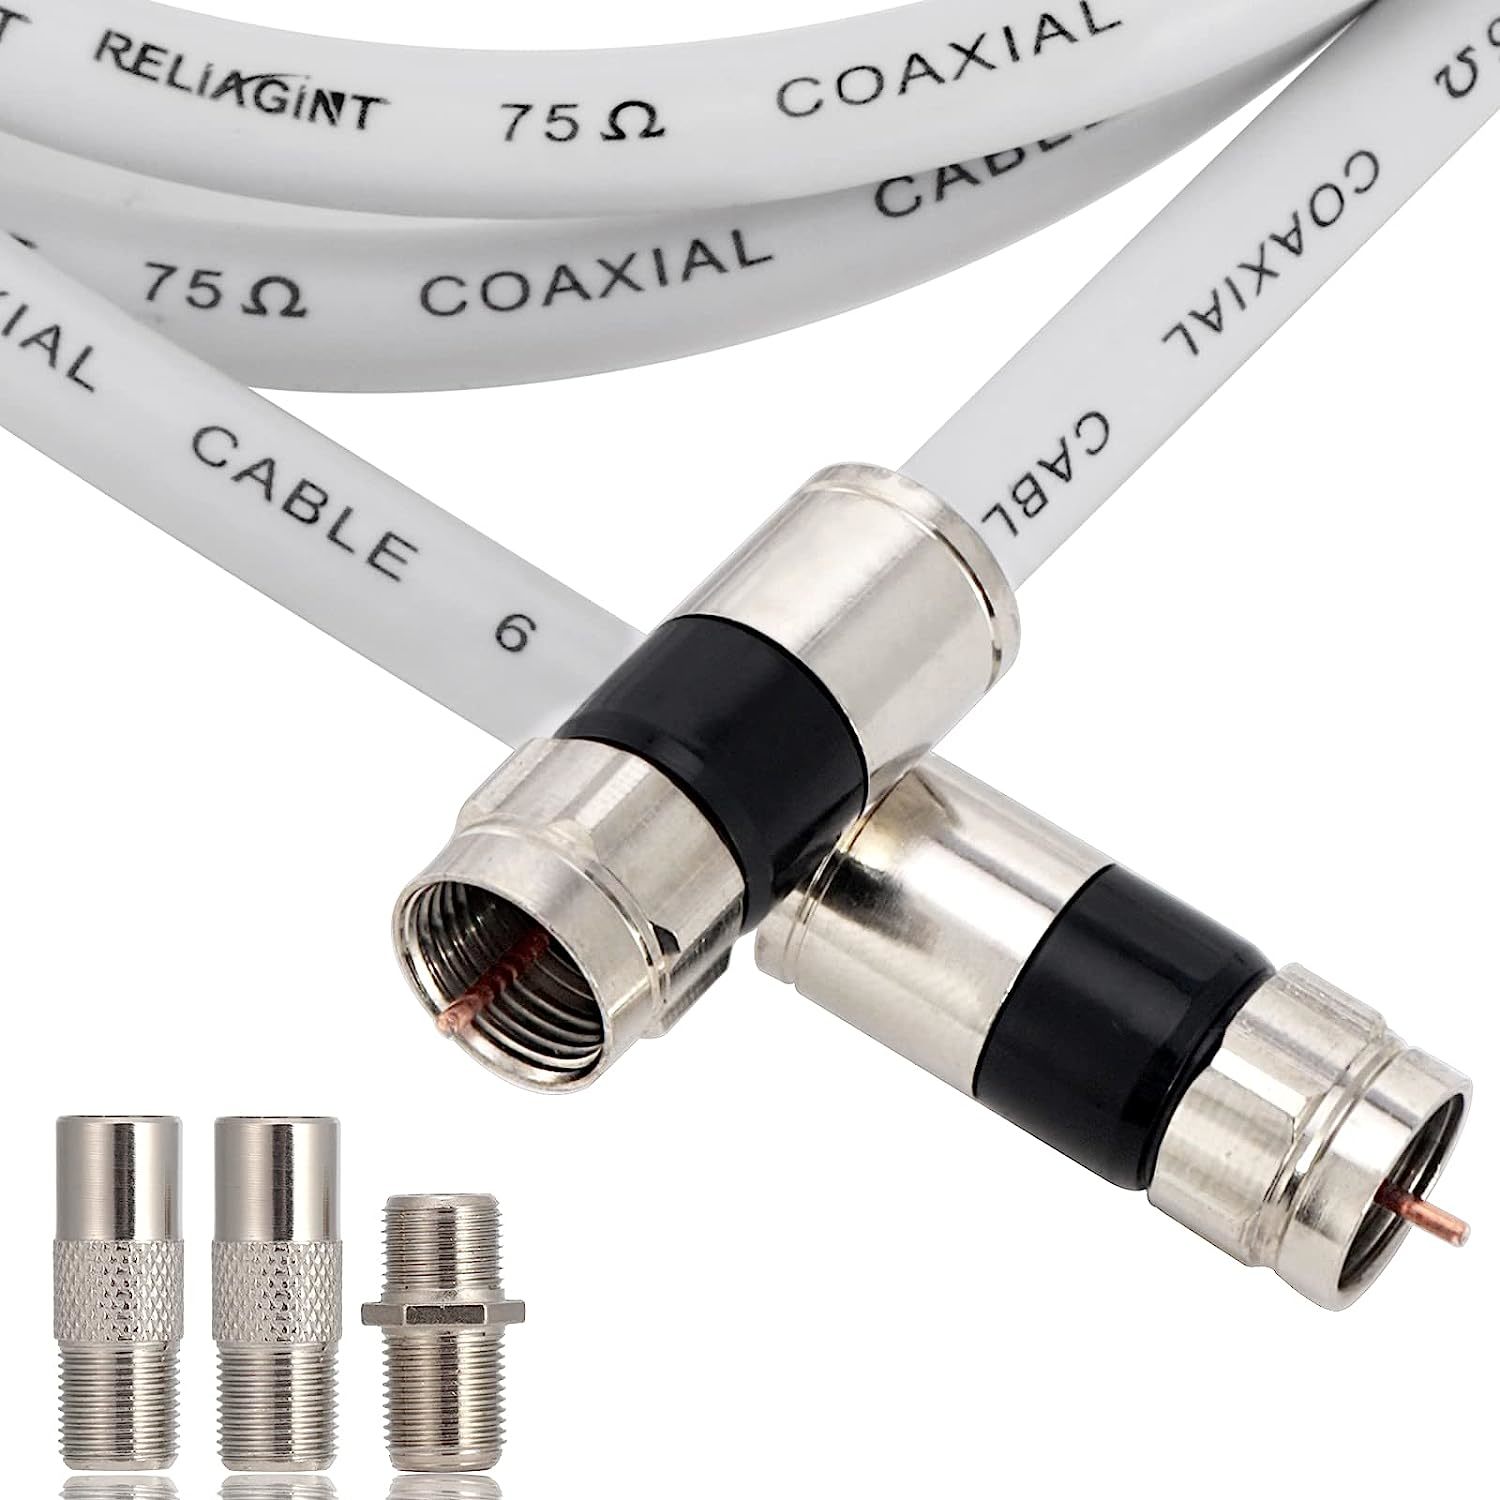 Primary image for 15Ft, White Rg6 Coaxial Cable With F Connector, F81 Female Extender Adapter, Low